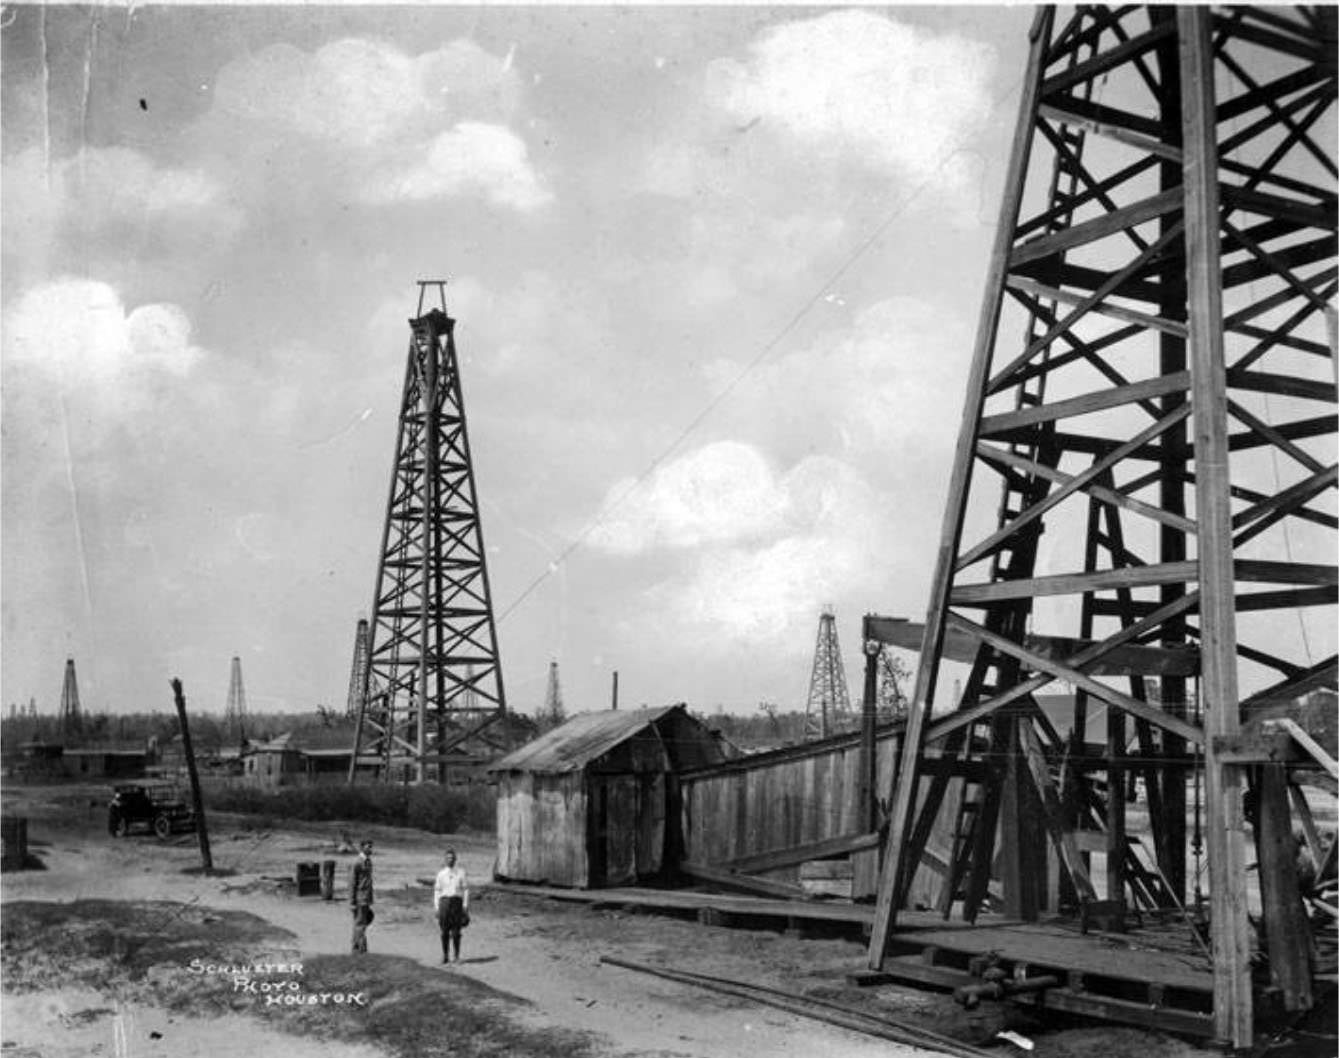 Two men standing on dirt road near an oil well, 1930s.